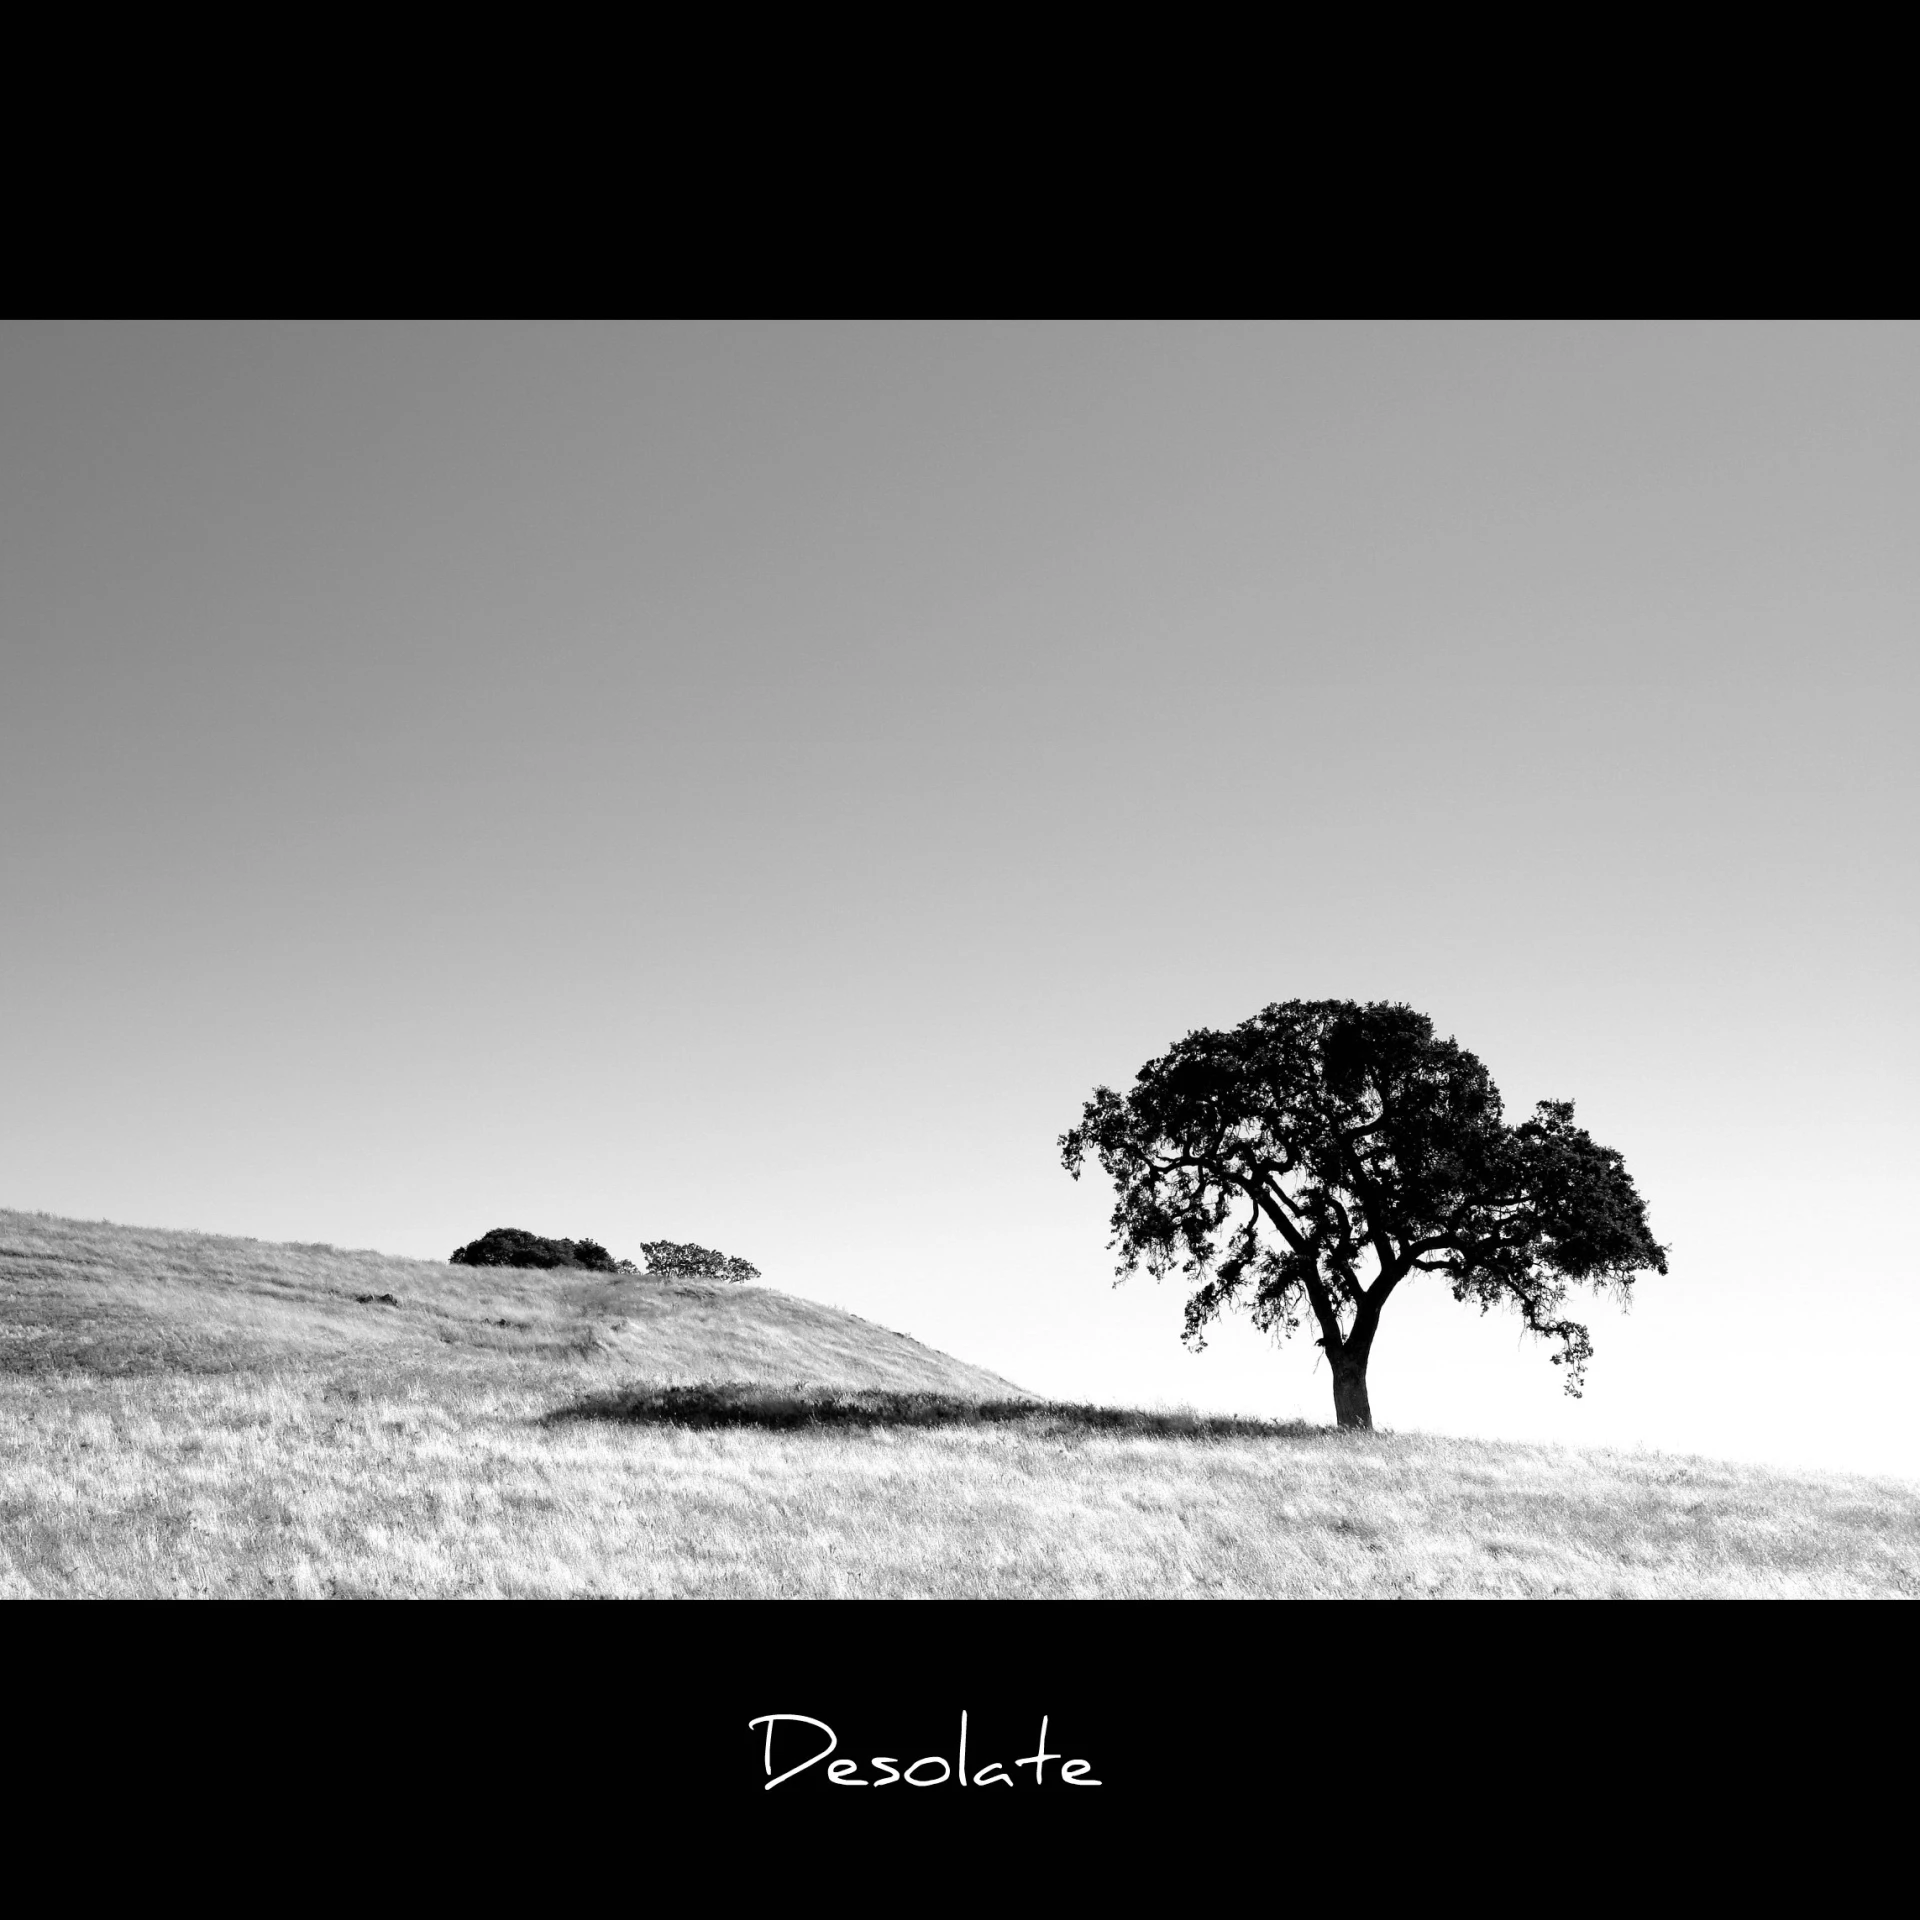 the lone tree is alone in the open field